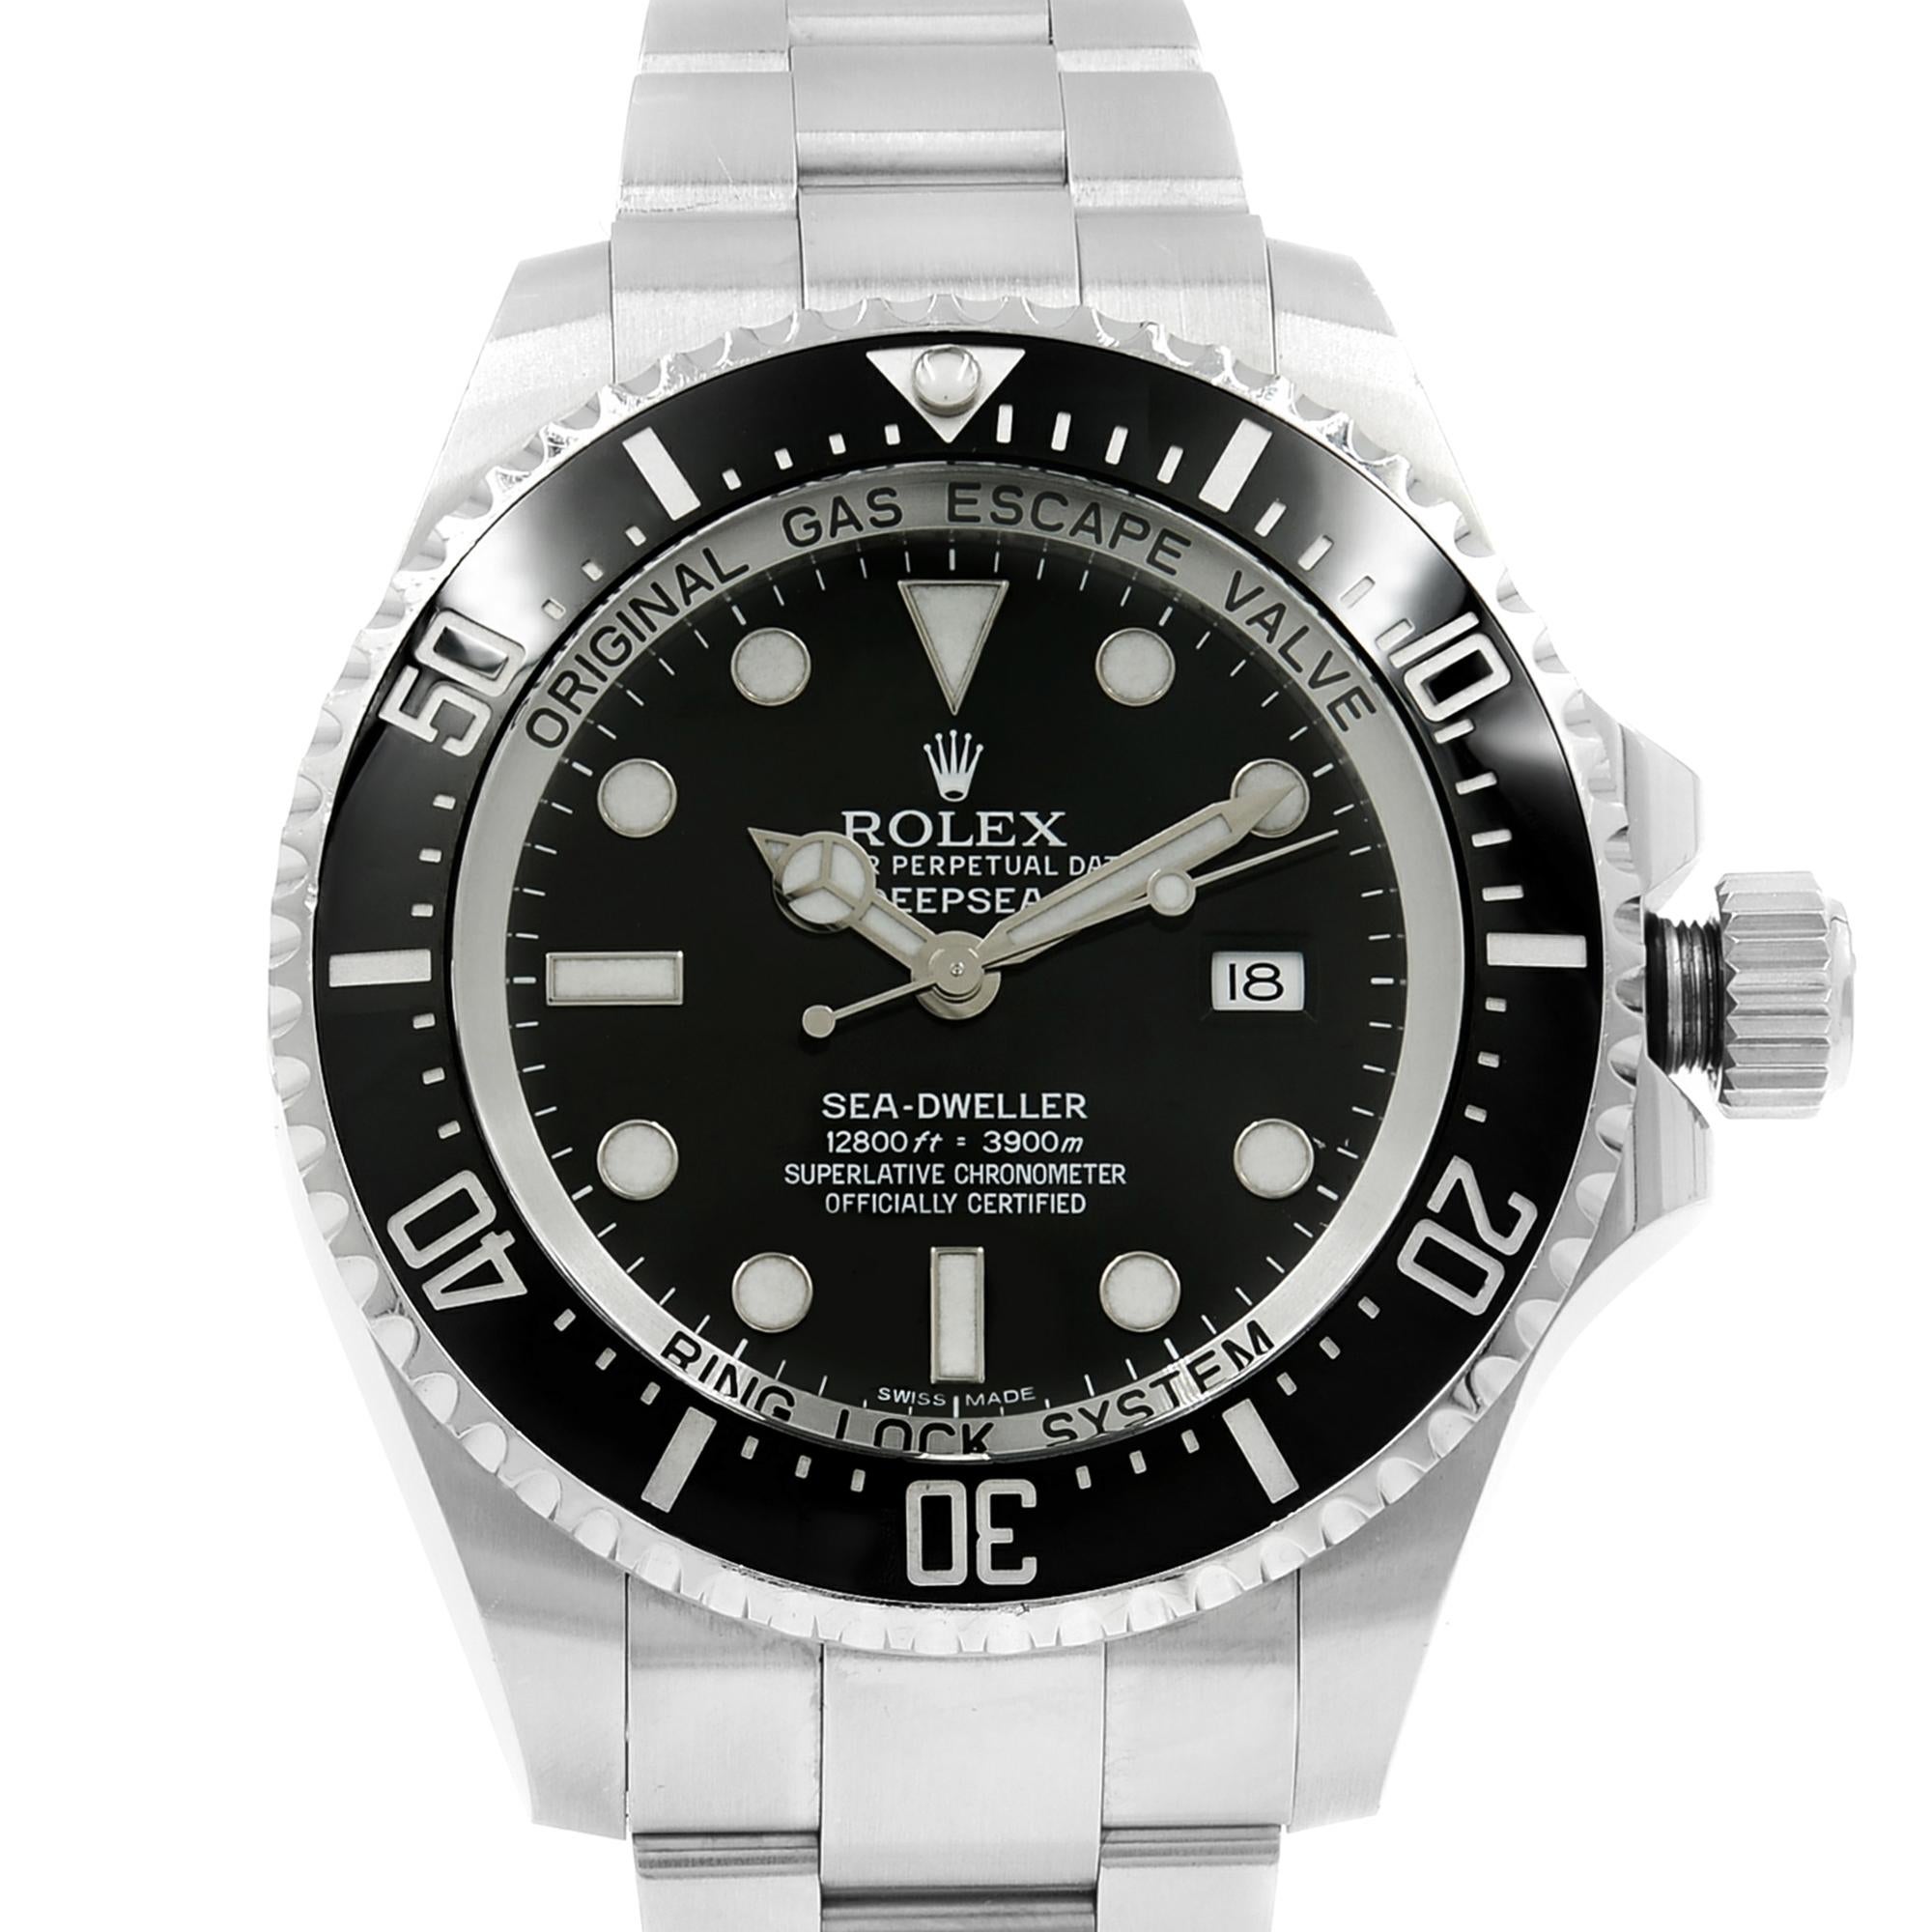 This pre-owned Rolex Sea-Dweller 116660 is a beautiful men's timepiece that is powered by mechanical (automatic) movement which is cased in a stainless steel case. It has a round shape face, date indicator dial and has hand sticks & dots style